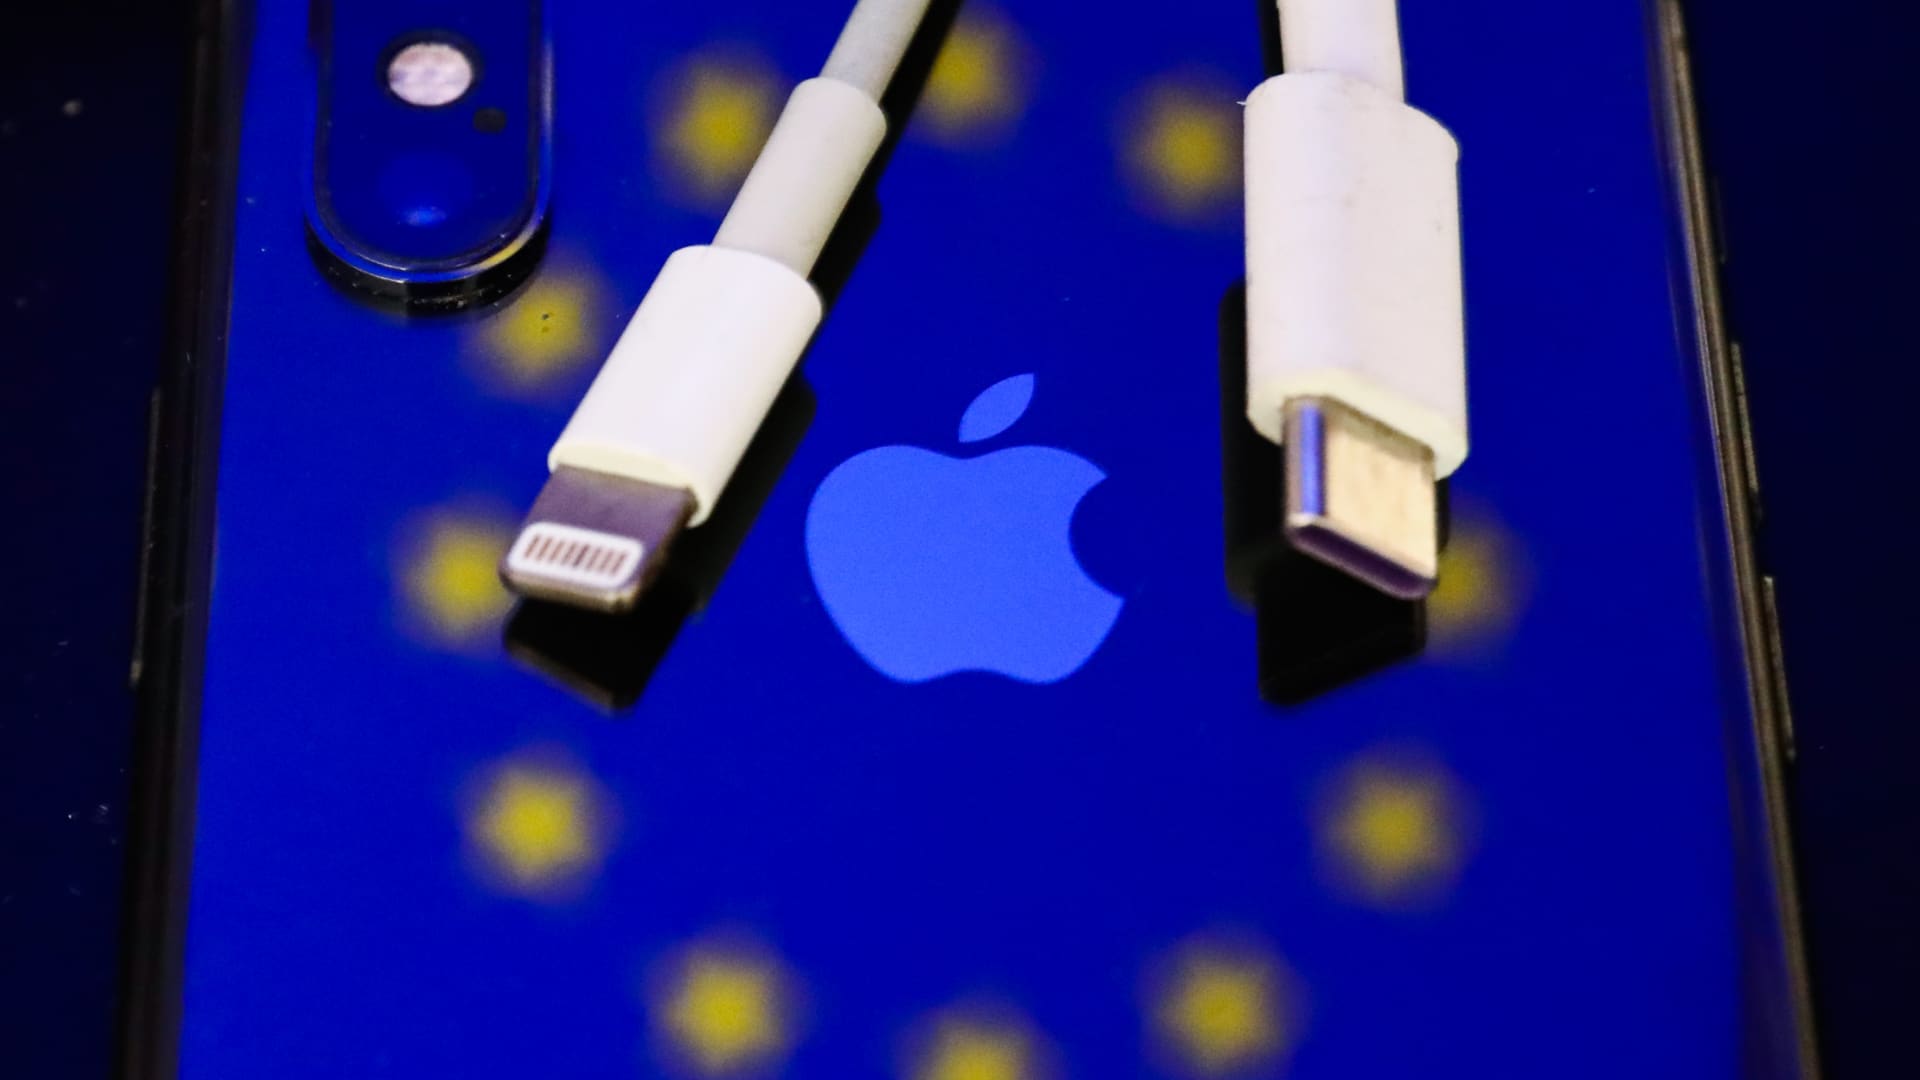 iPho<em></em>nes will get USB-C charging after Apple says it will have to comply with EU law